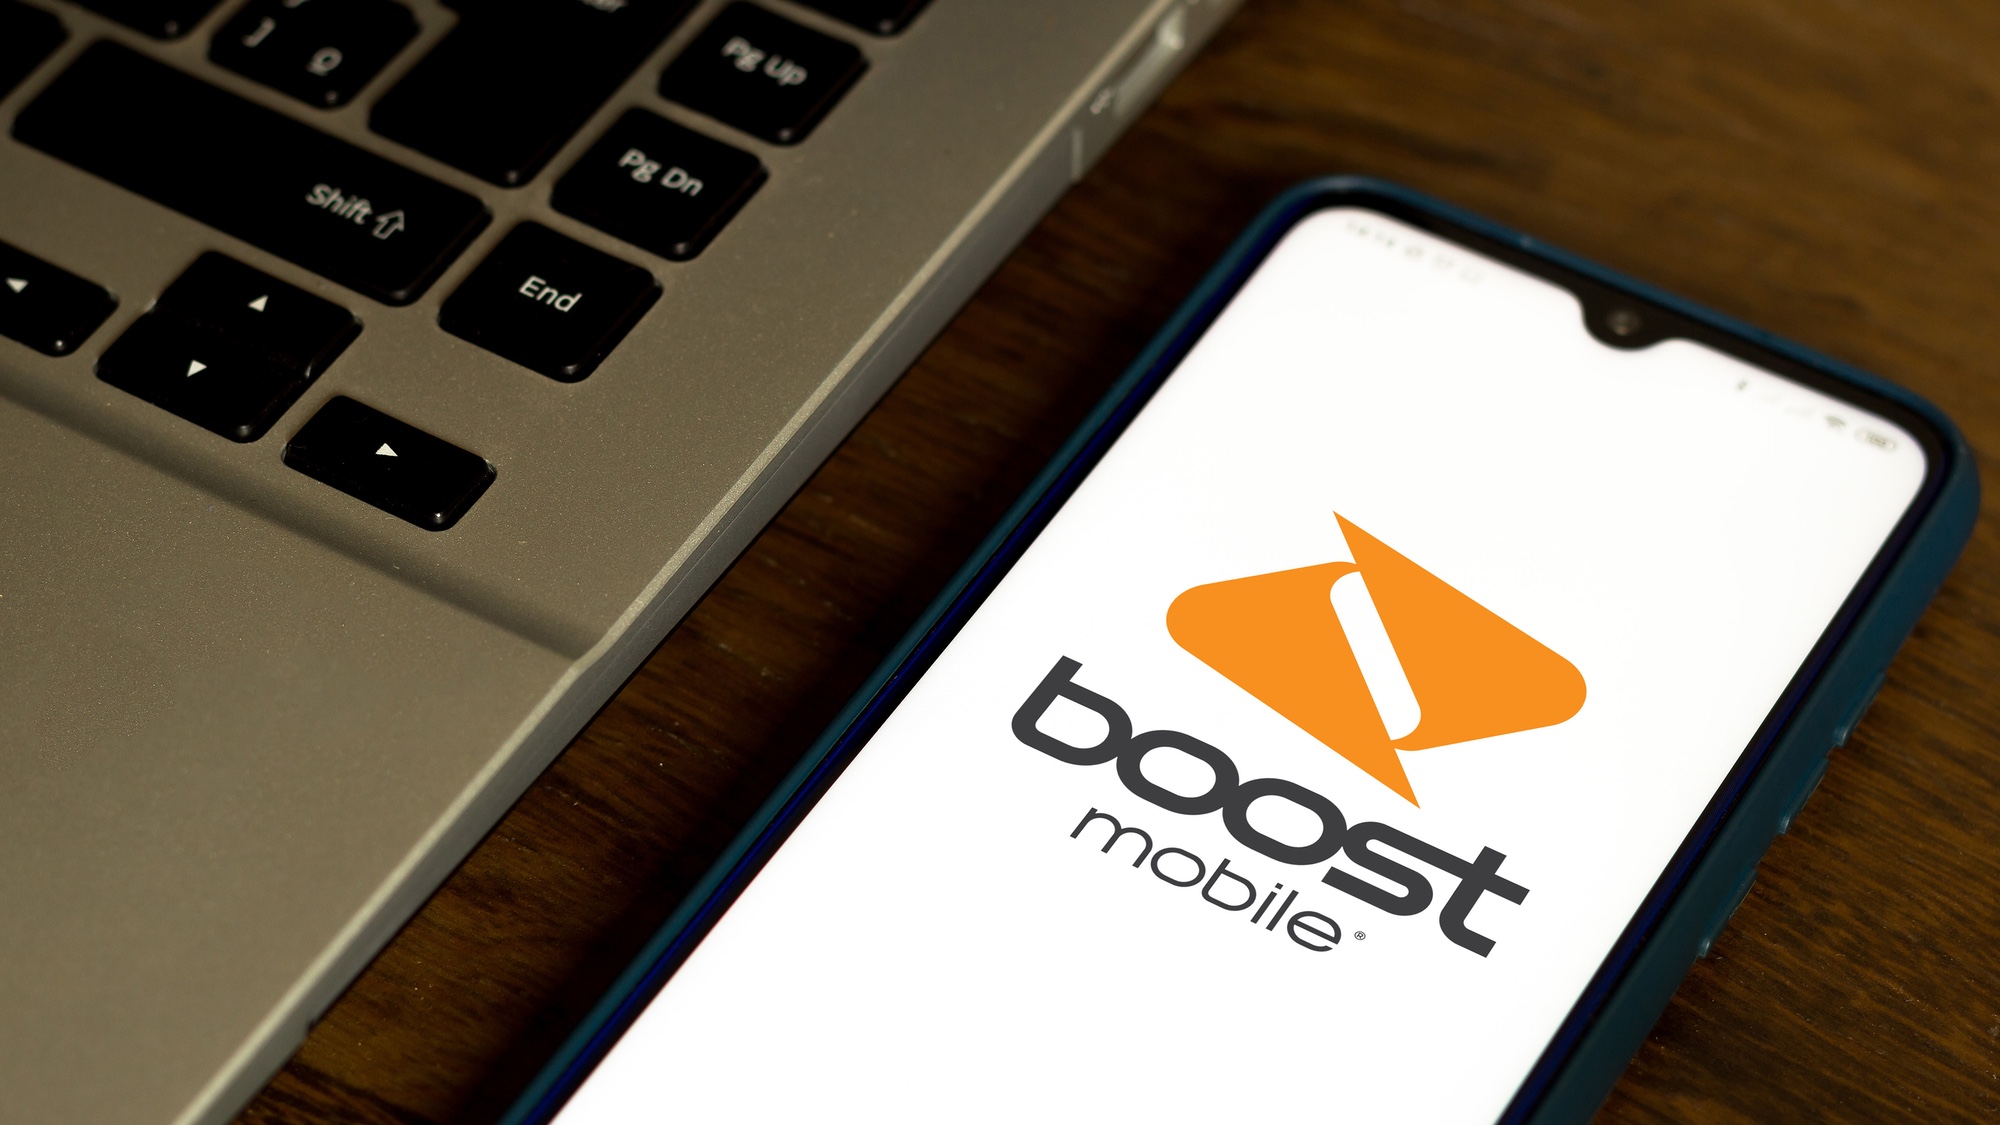 What Towers Does Boost Mobile Use?